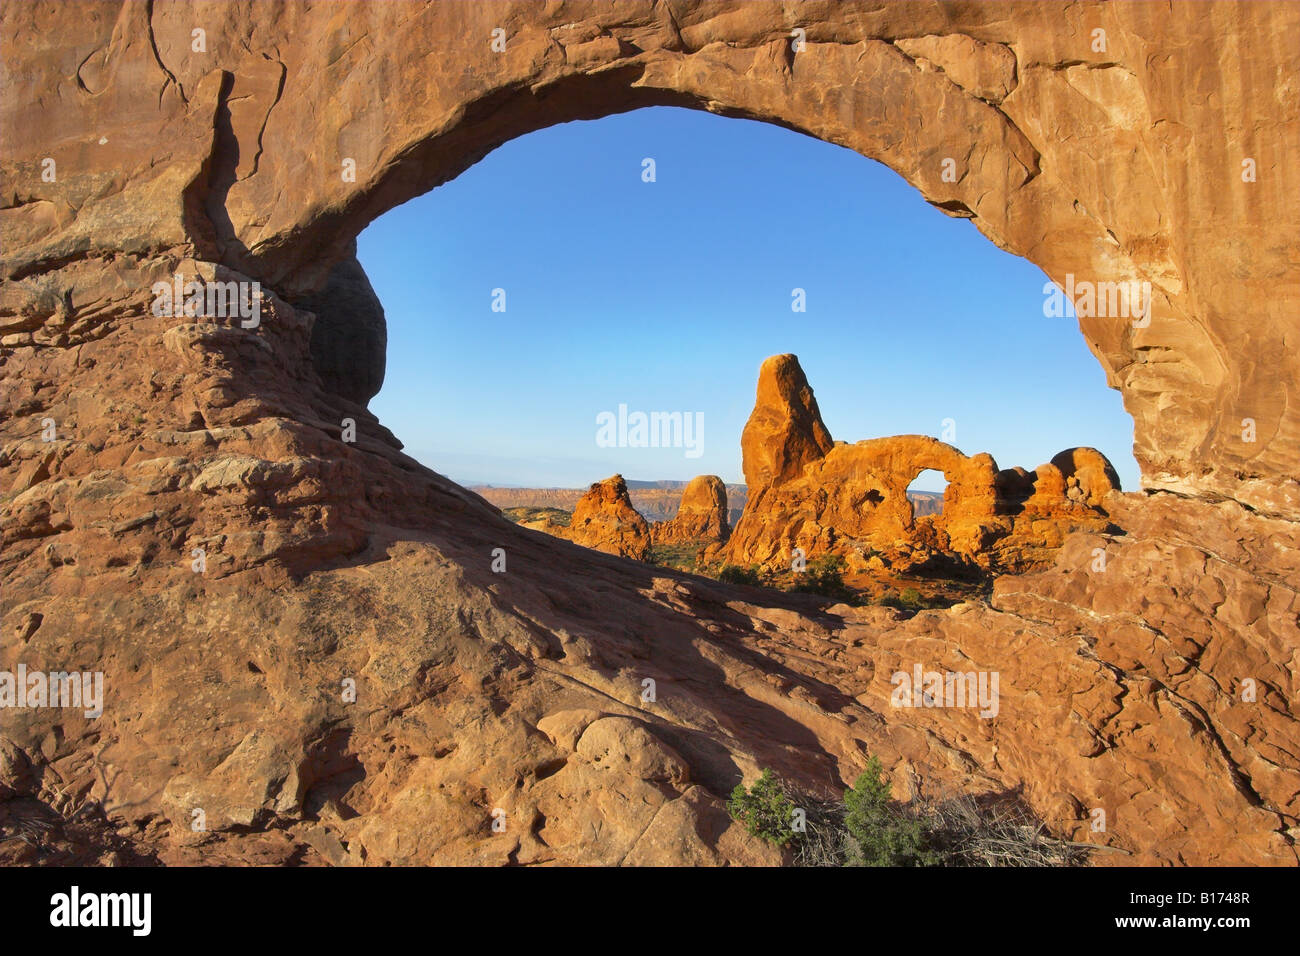 An arch in a huge natural stone wall through which other arches are visible in National park in the USA Stock Photo